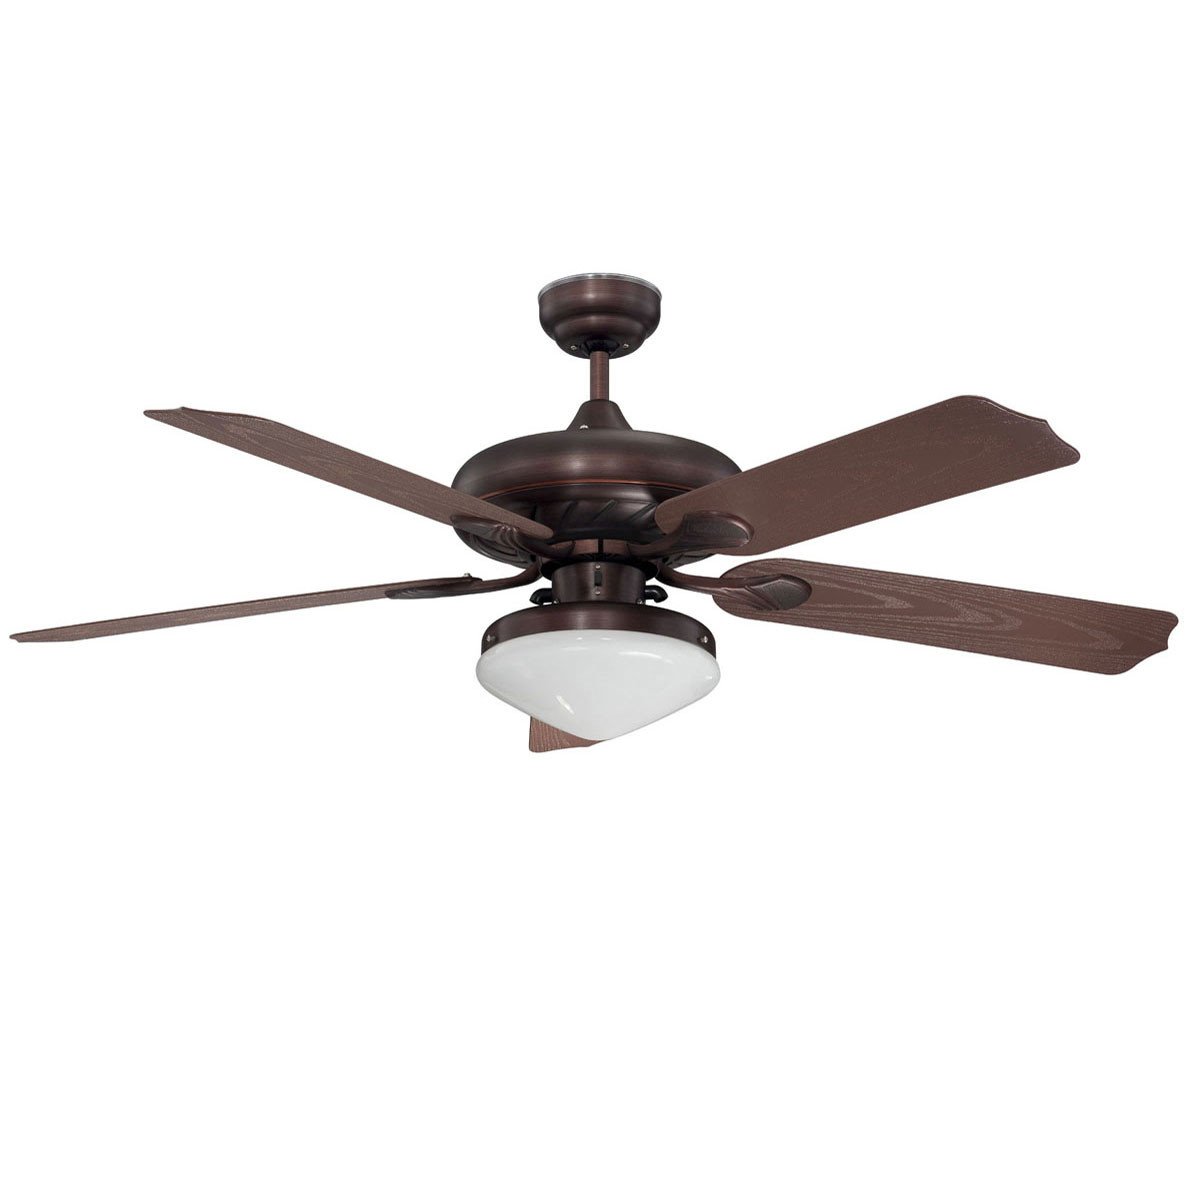 Concord Fans 52" Oil Rubbed Bronze Outdoor Ceiling Fan with Light Kit